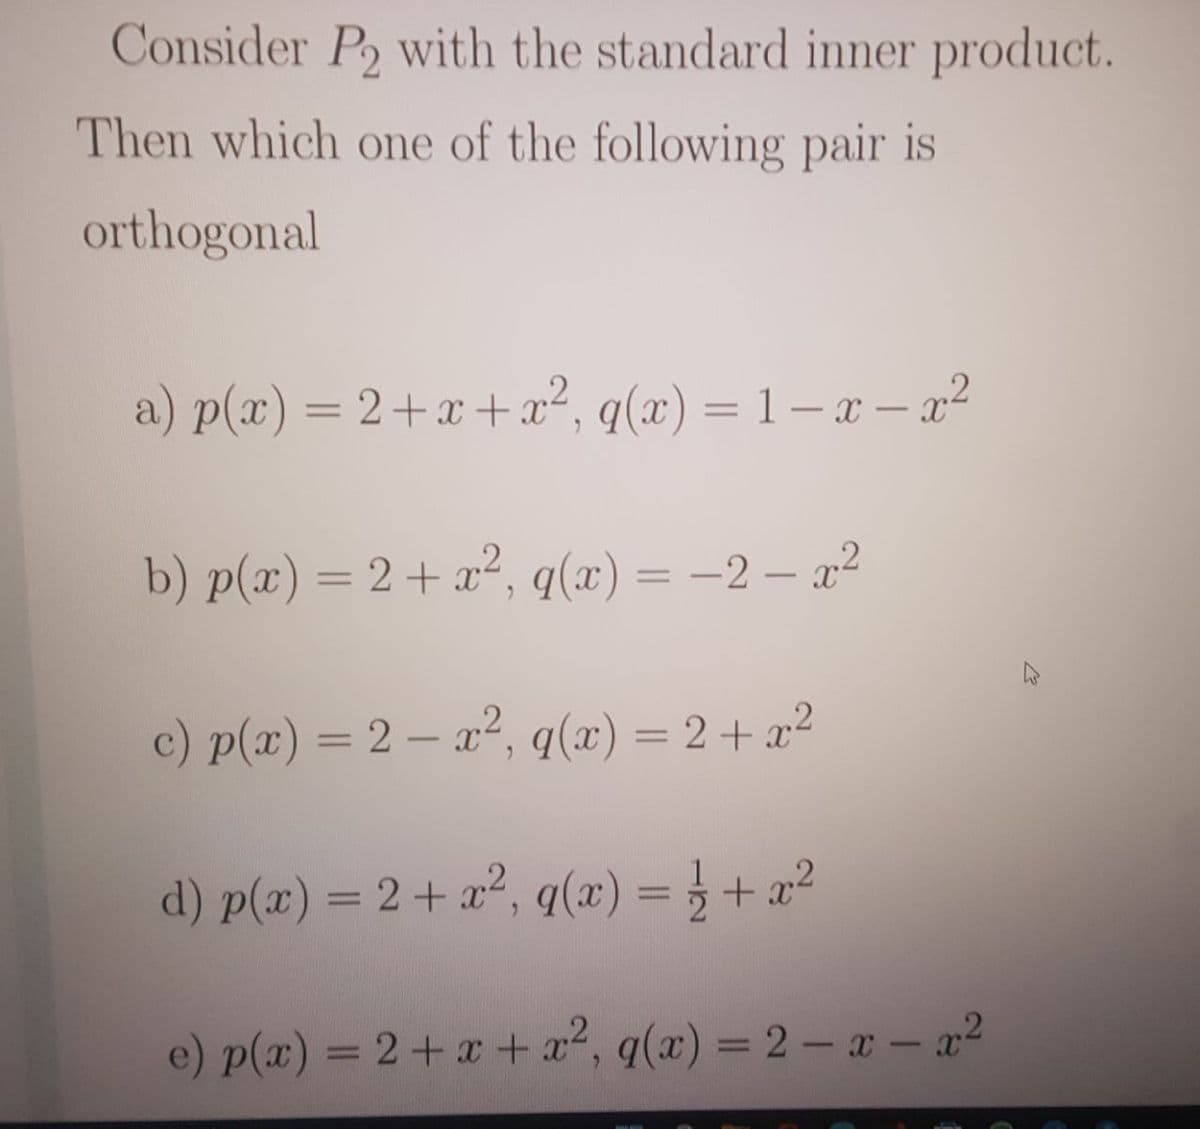 Consider P2 with the standard inner product.
Then which one of the following pair is
orthogonal
a) p(x) = 2+x +x², q(x) = 1 – x – x°
%3D
%3D
b) p(x) = 2+x², q(x) = -2 – x²
c) p(x) = 2 – a², q(x)= 2+ x²
d) p(x) = 2 + x², q(x) = } + a²
e) p(x) = 2+ x+ x2, q(x) = 2 – x - x2
%3D
%3D
